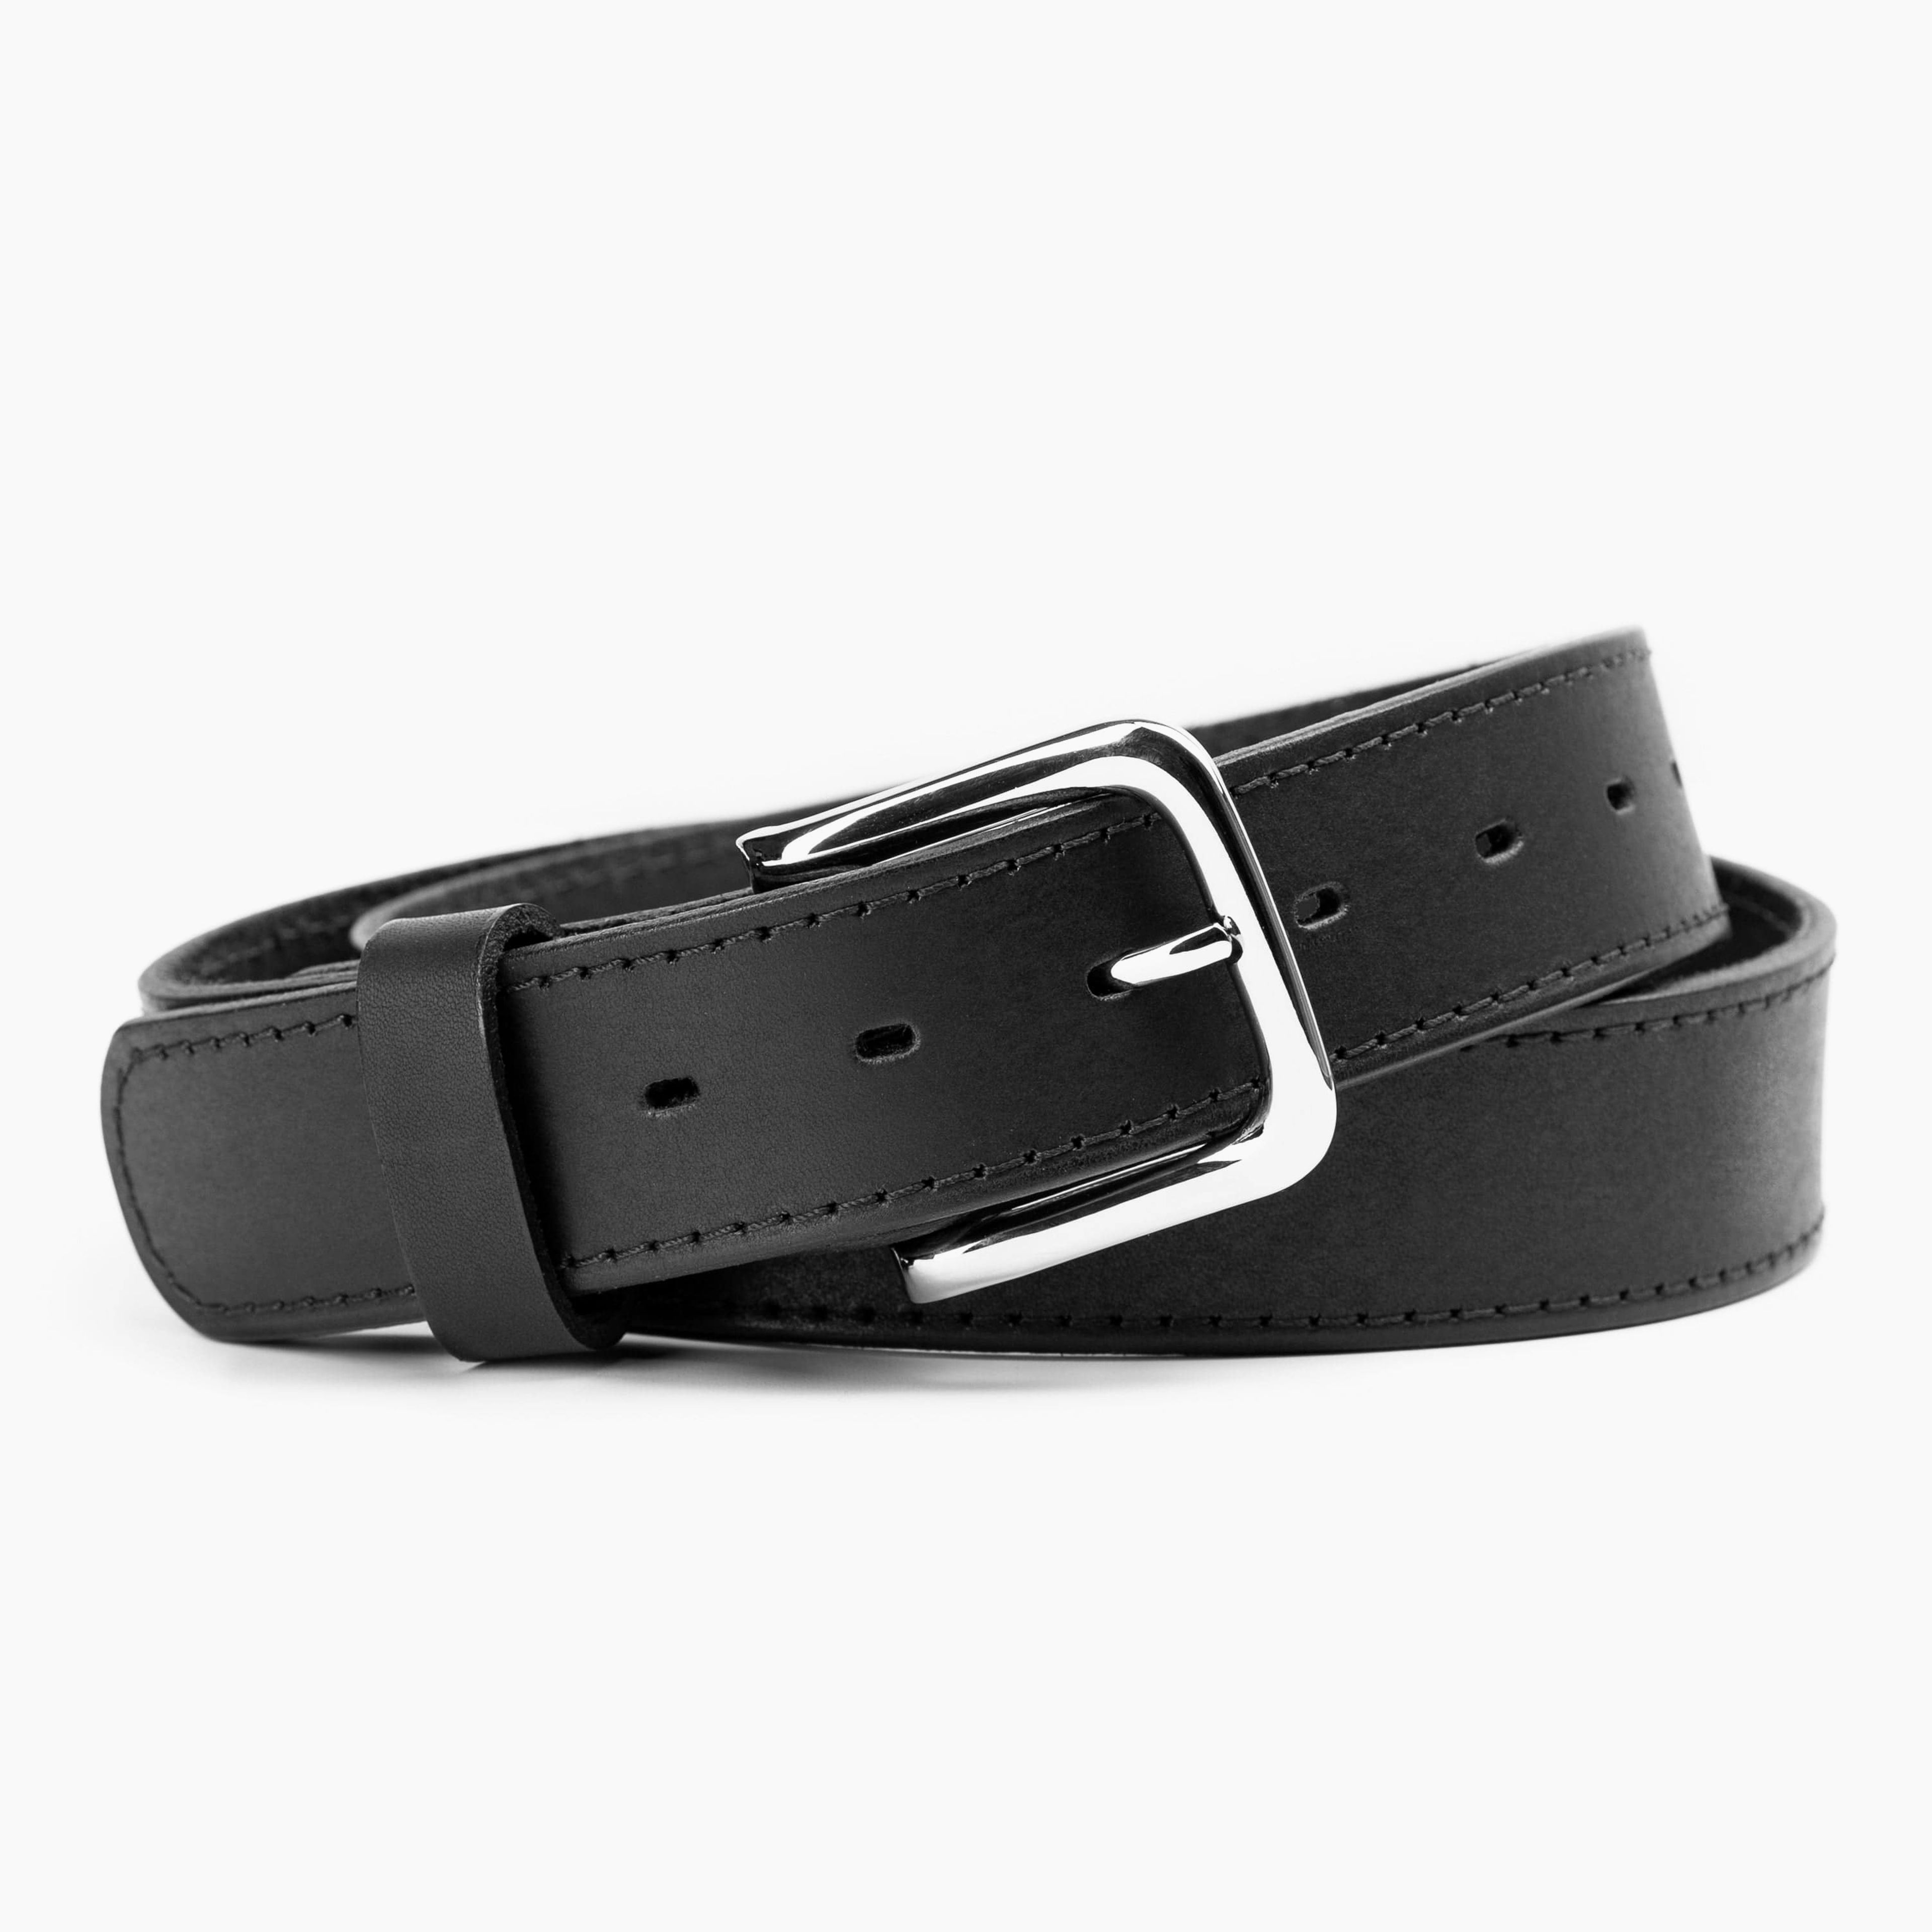 The Foreman Leather Belt